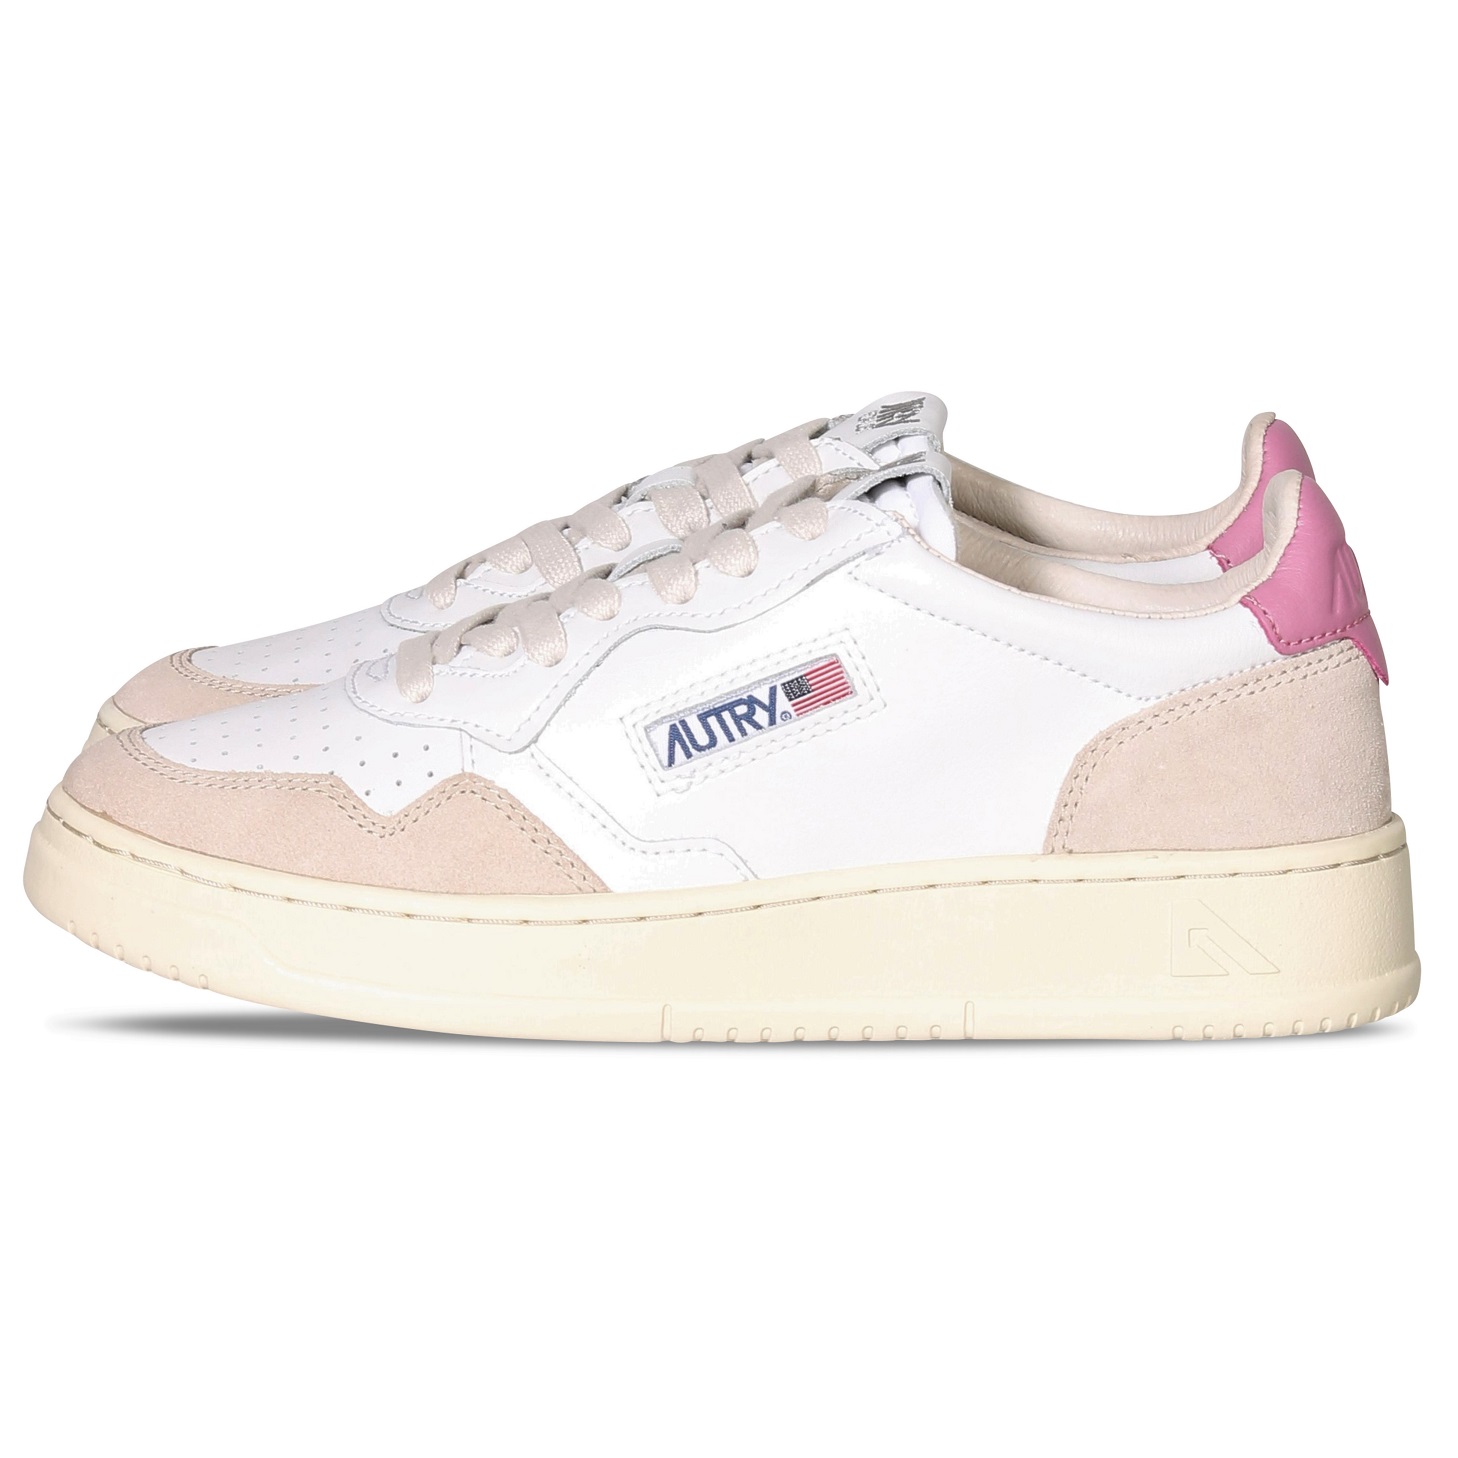 AUTRY ACTION SHOES Low Sneaker in Beige Suede/White/Pink